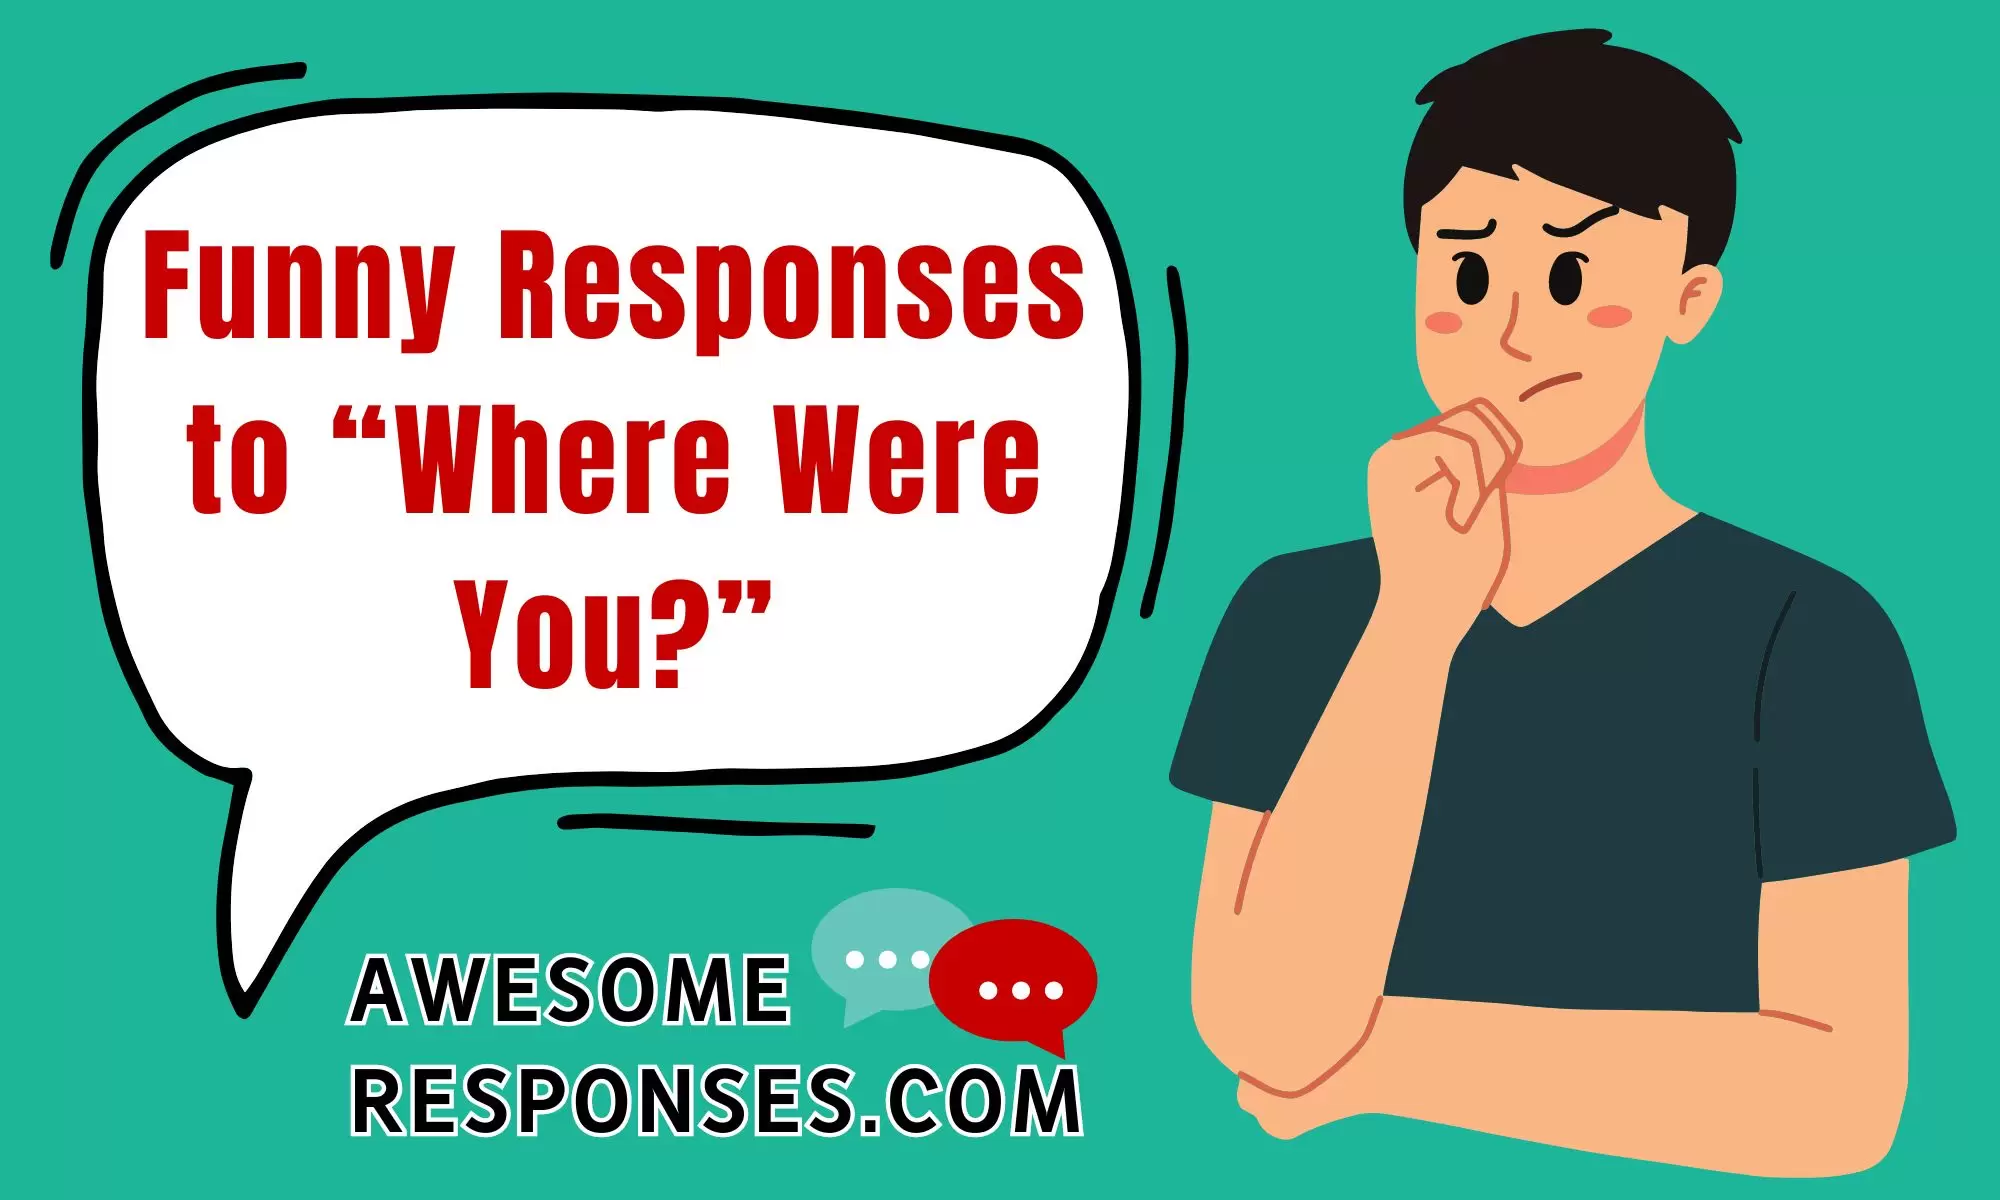 Funny Responses to “Where Were You?”